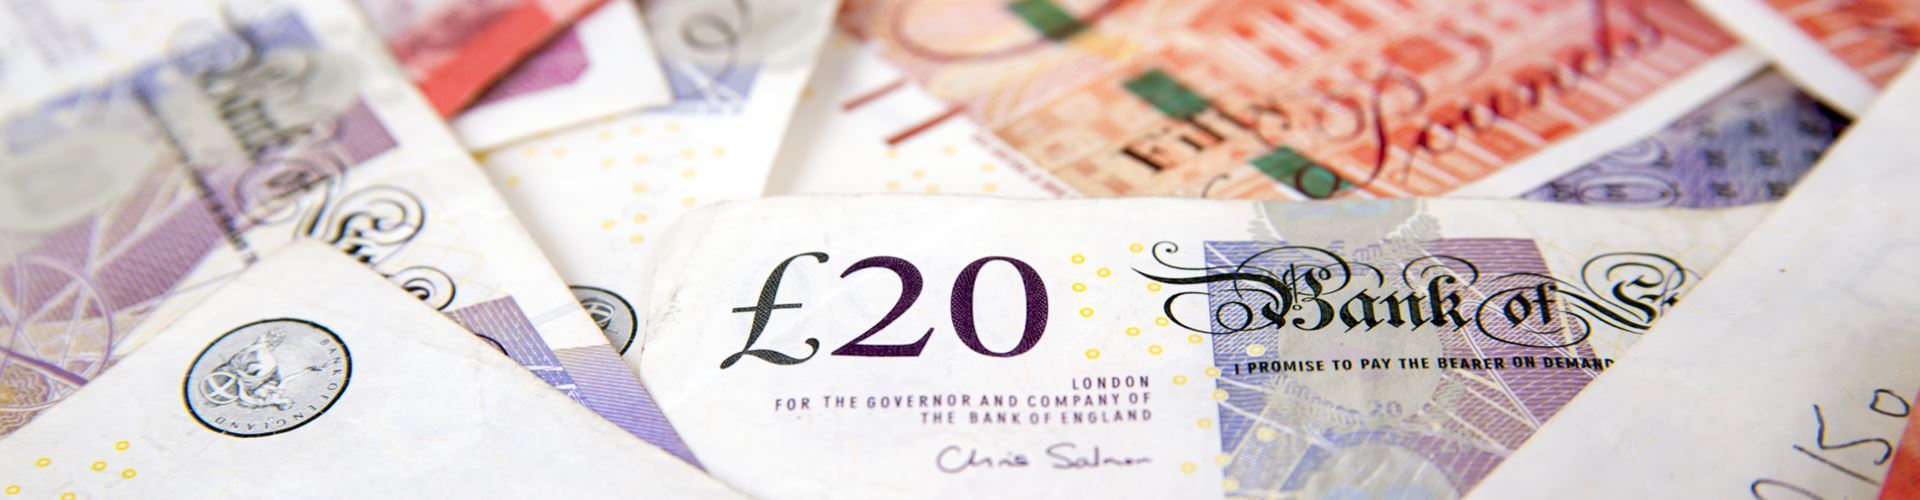 SMEs to contribute £217bn to UK economy, says research